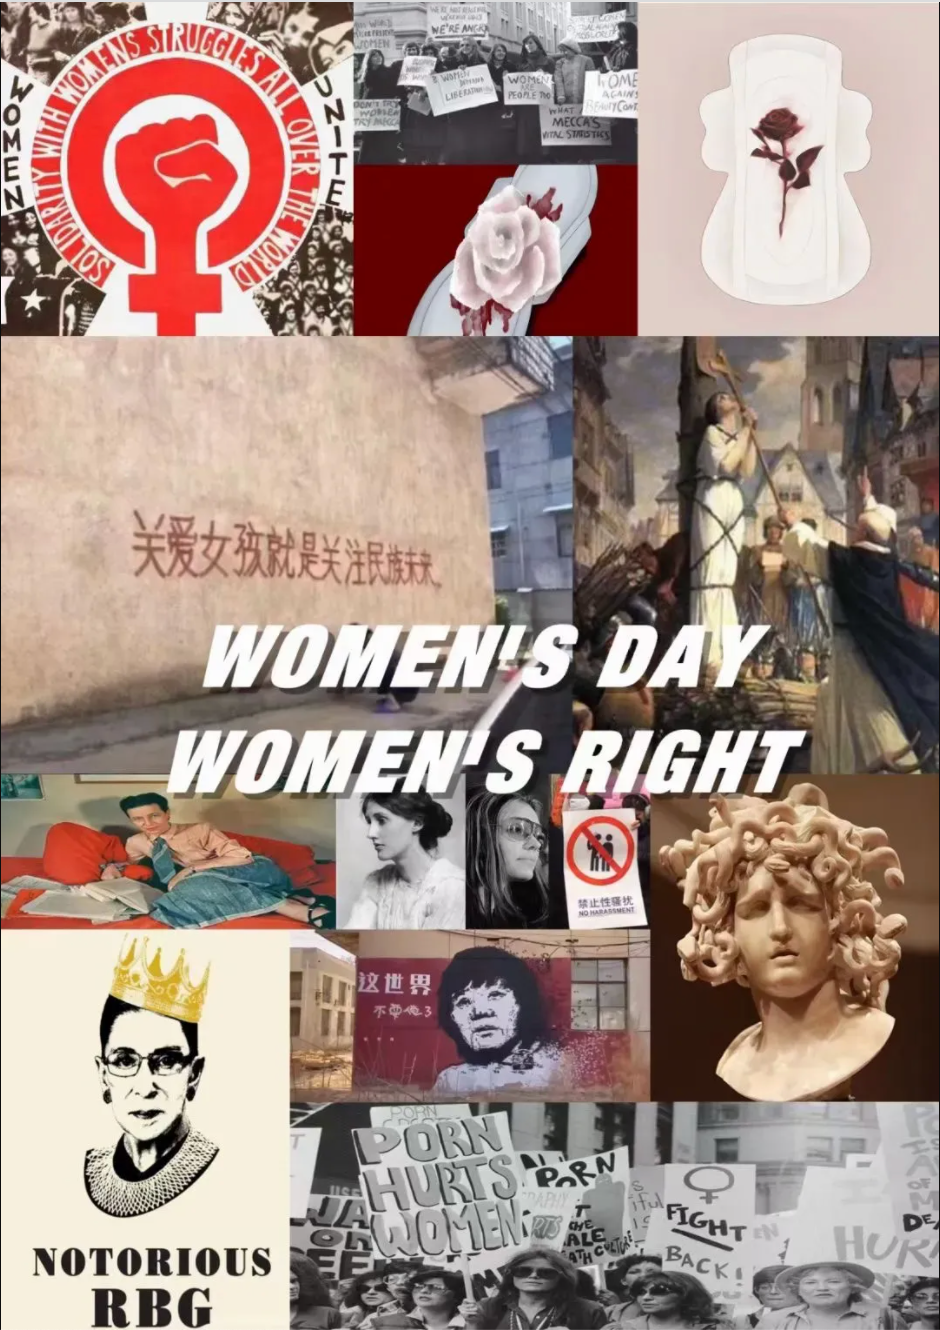 A collage of feminist artwork, protest photos, and feminist icons, including Joan or Arc, Medusa, Virginia Woolf, Gloria Steinem, the “Notorious RBG,” and Xiaohuamei. An English caption in the center reads, "Women's Day, Women's Right."